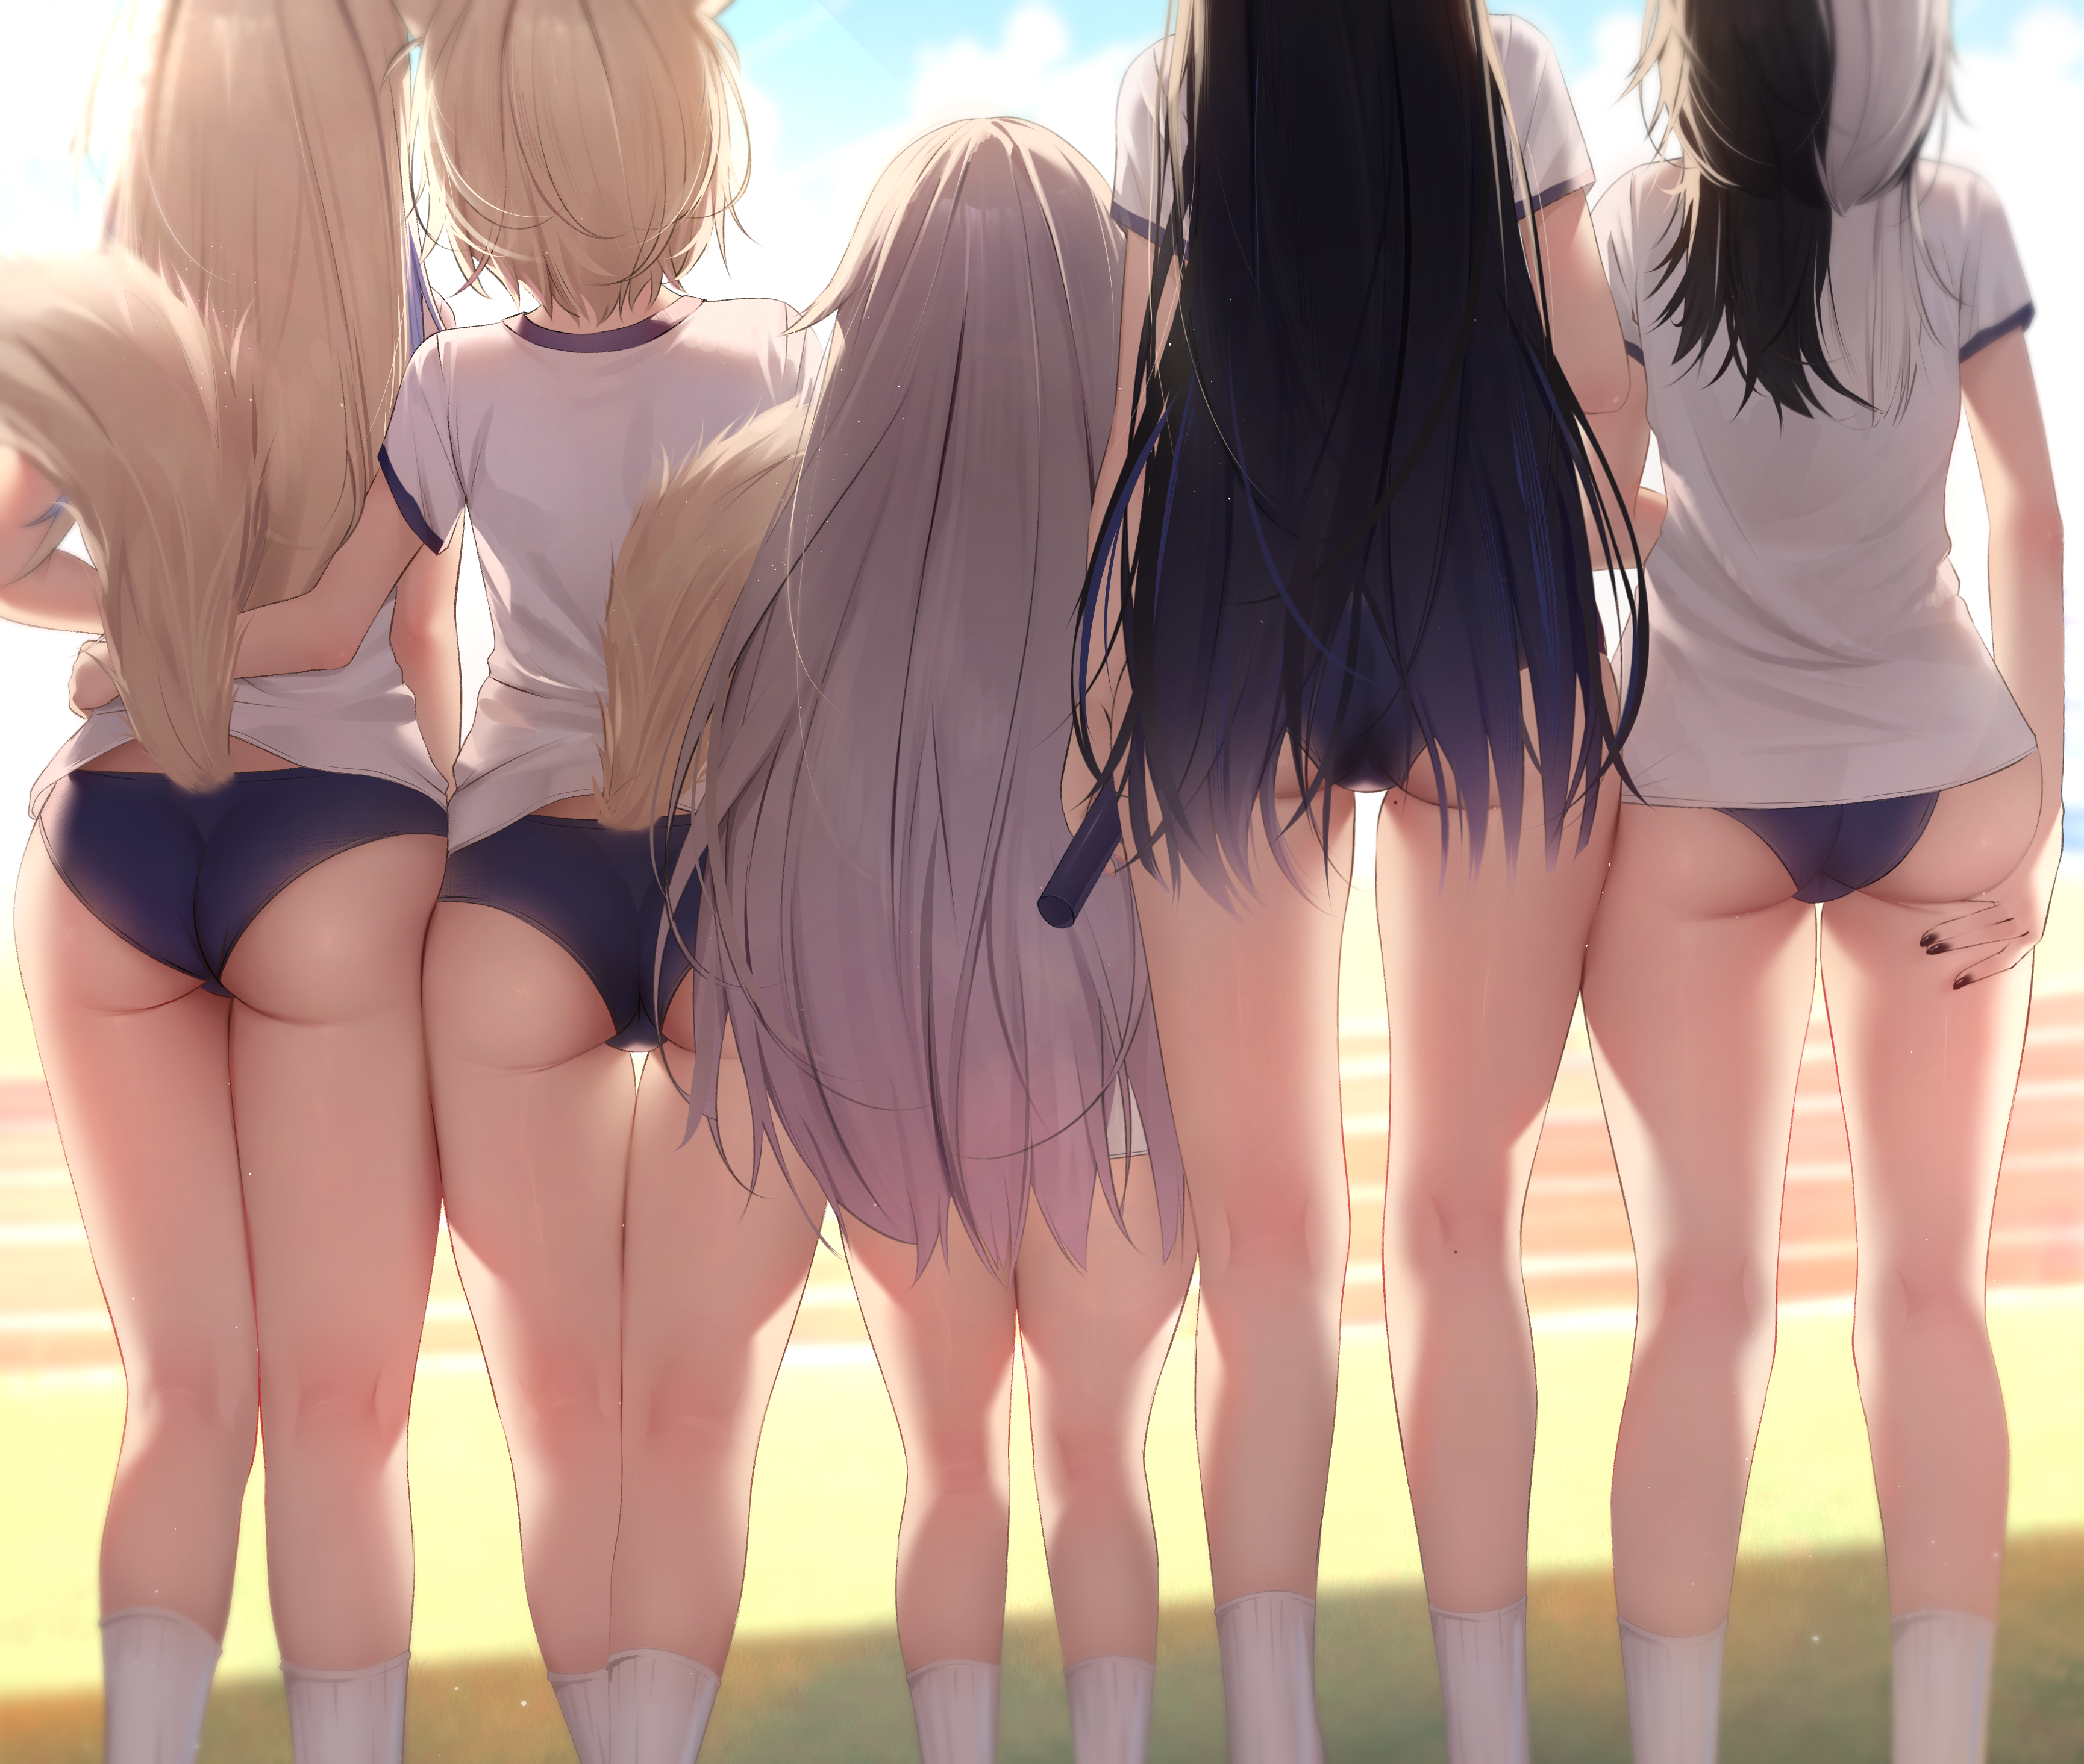 Anime 3459x2928 gym clothes Hololive Hololive English Shiori Novella Fuwawa Abyssgard Mococo Abyssgard Koseki Bijou Virtual Youtuber prab Nerissa Ravencroft group of asses buruma the gap rear view standing rear view standing long hair thighs together knees together bright